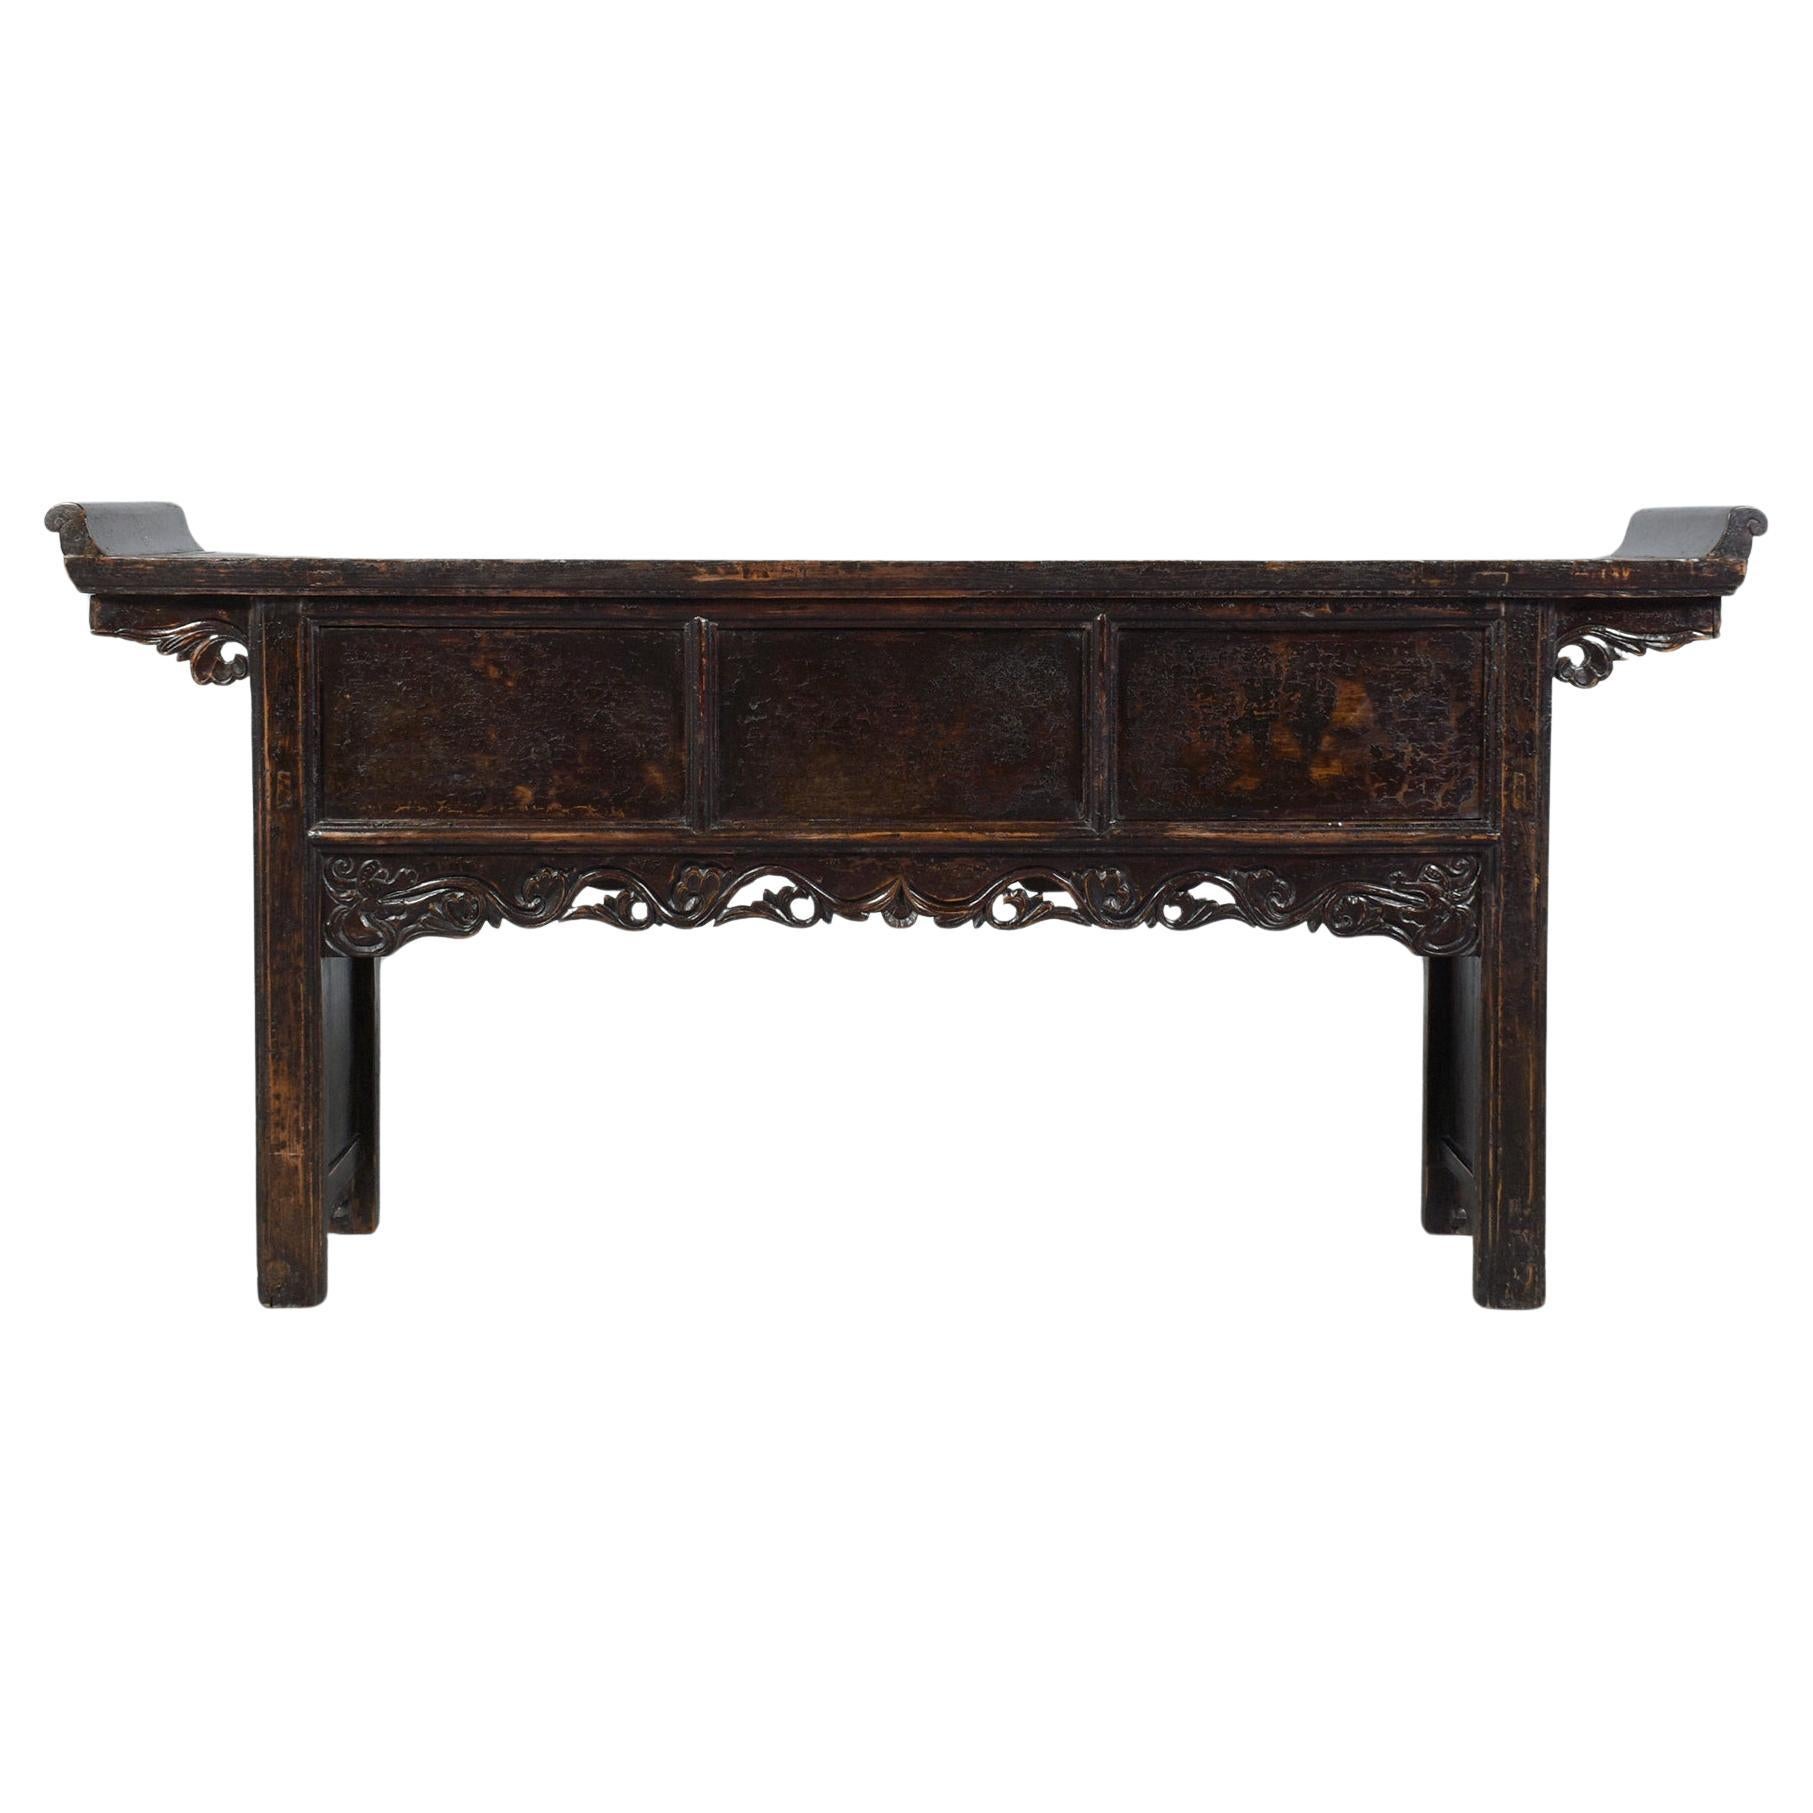 Early 20th Century Chinese Altar Console: Timeless Elegance Restored